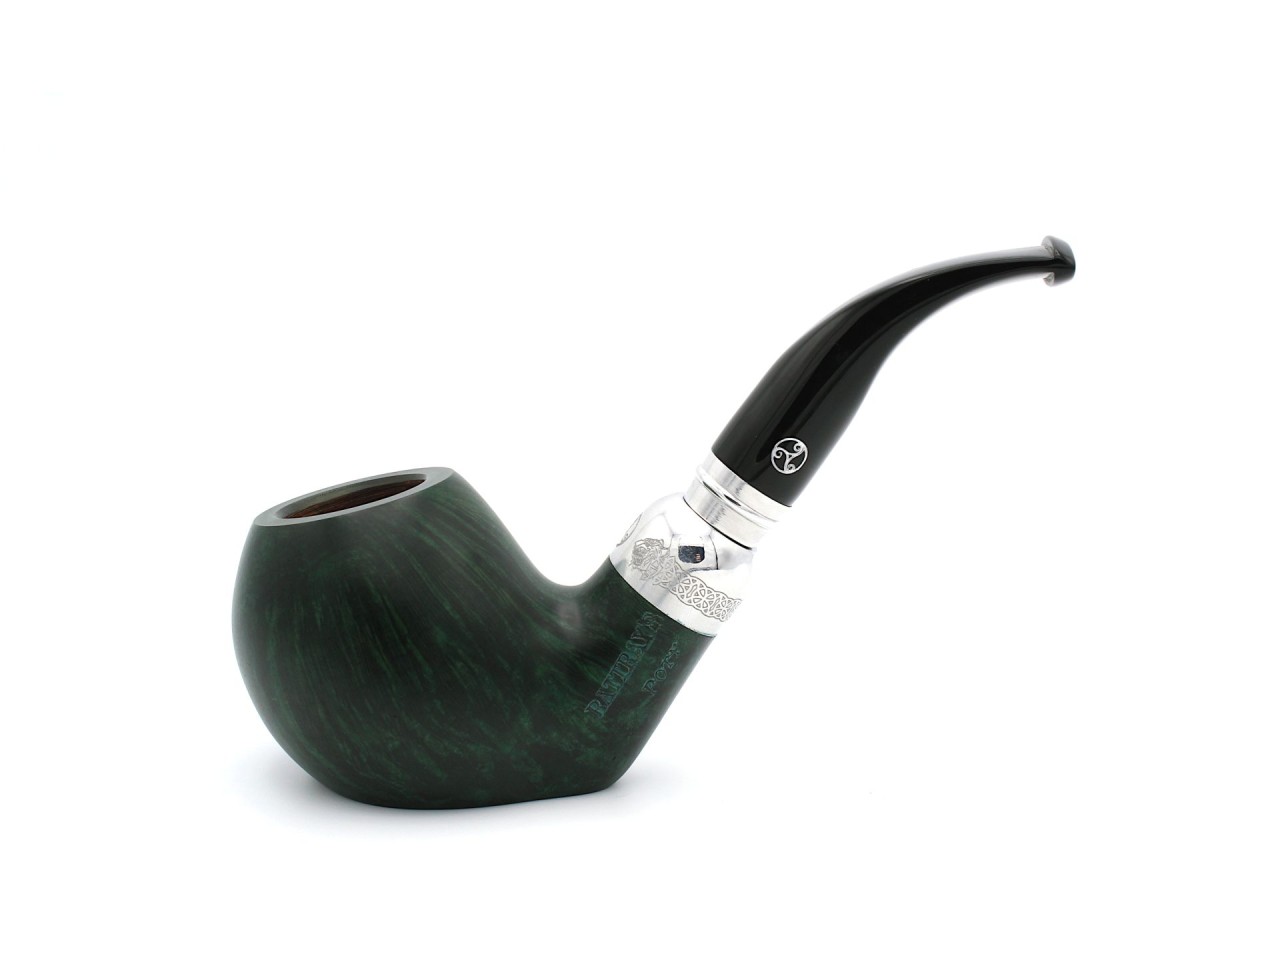 Rattray's Pipe of the Year 2022